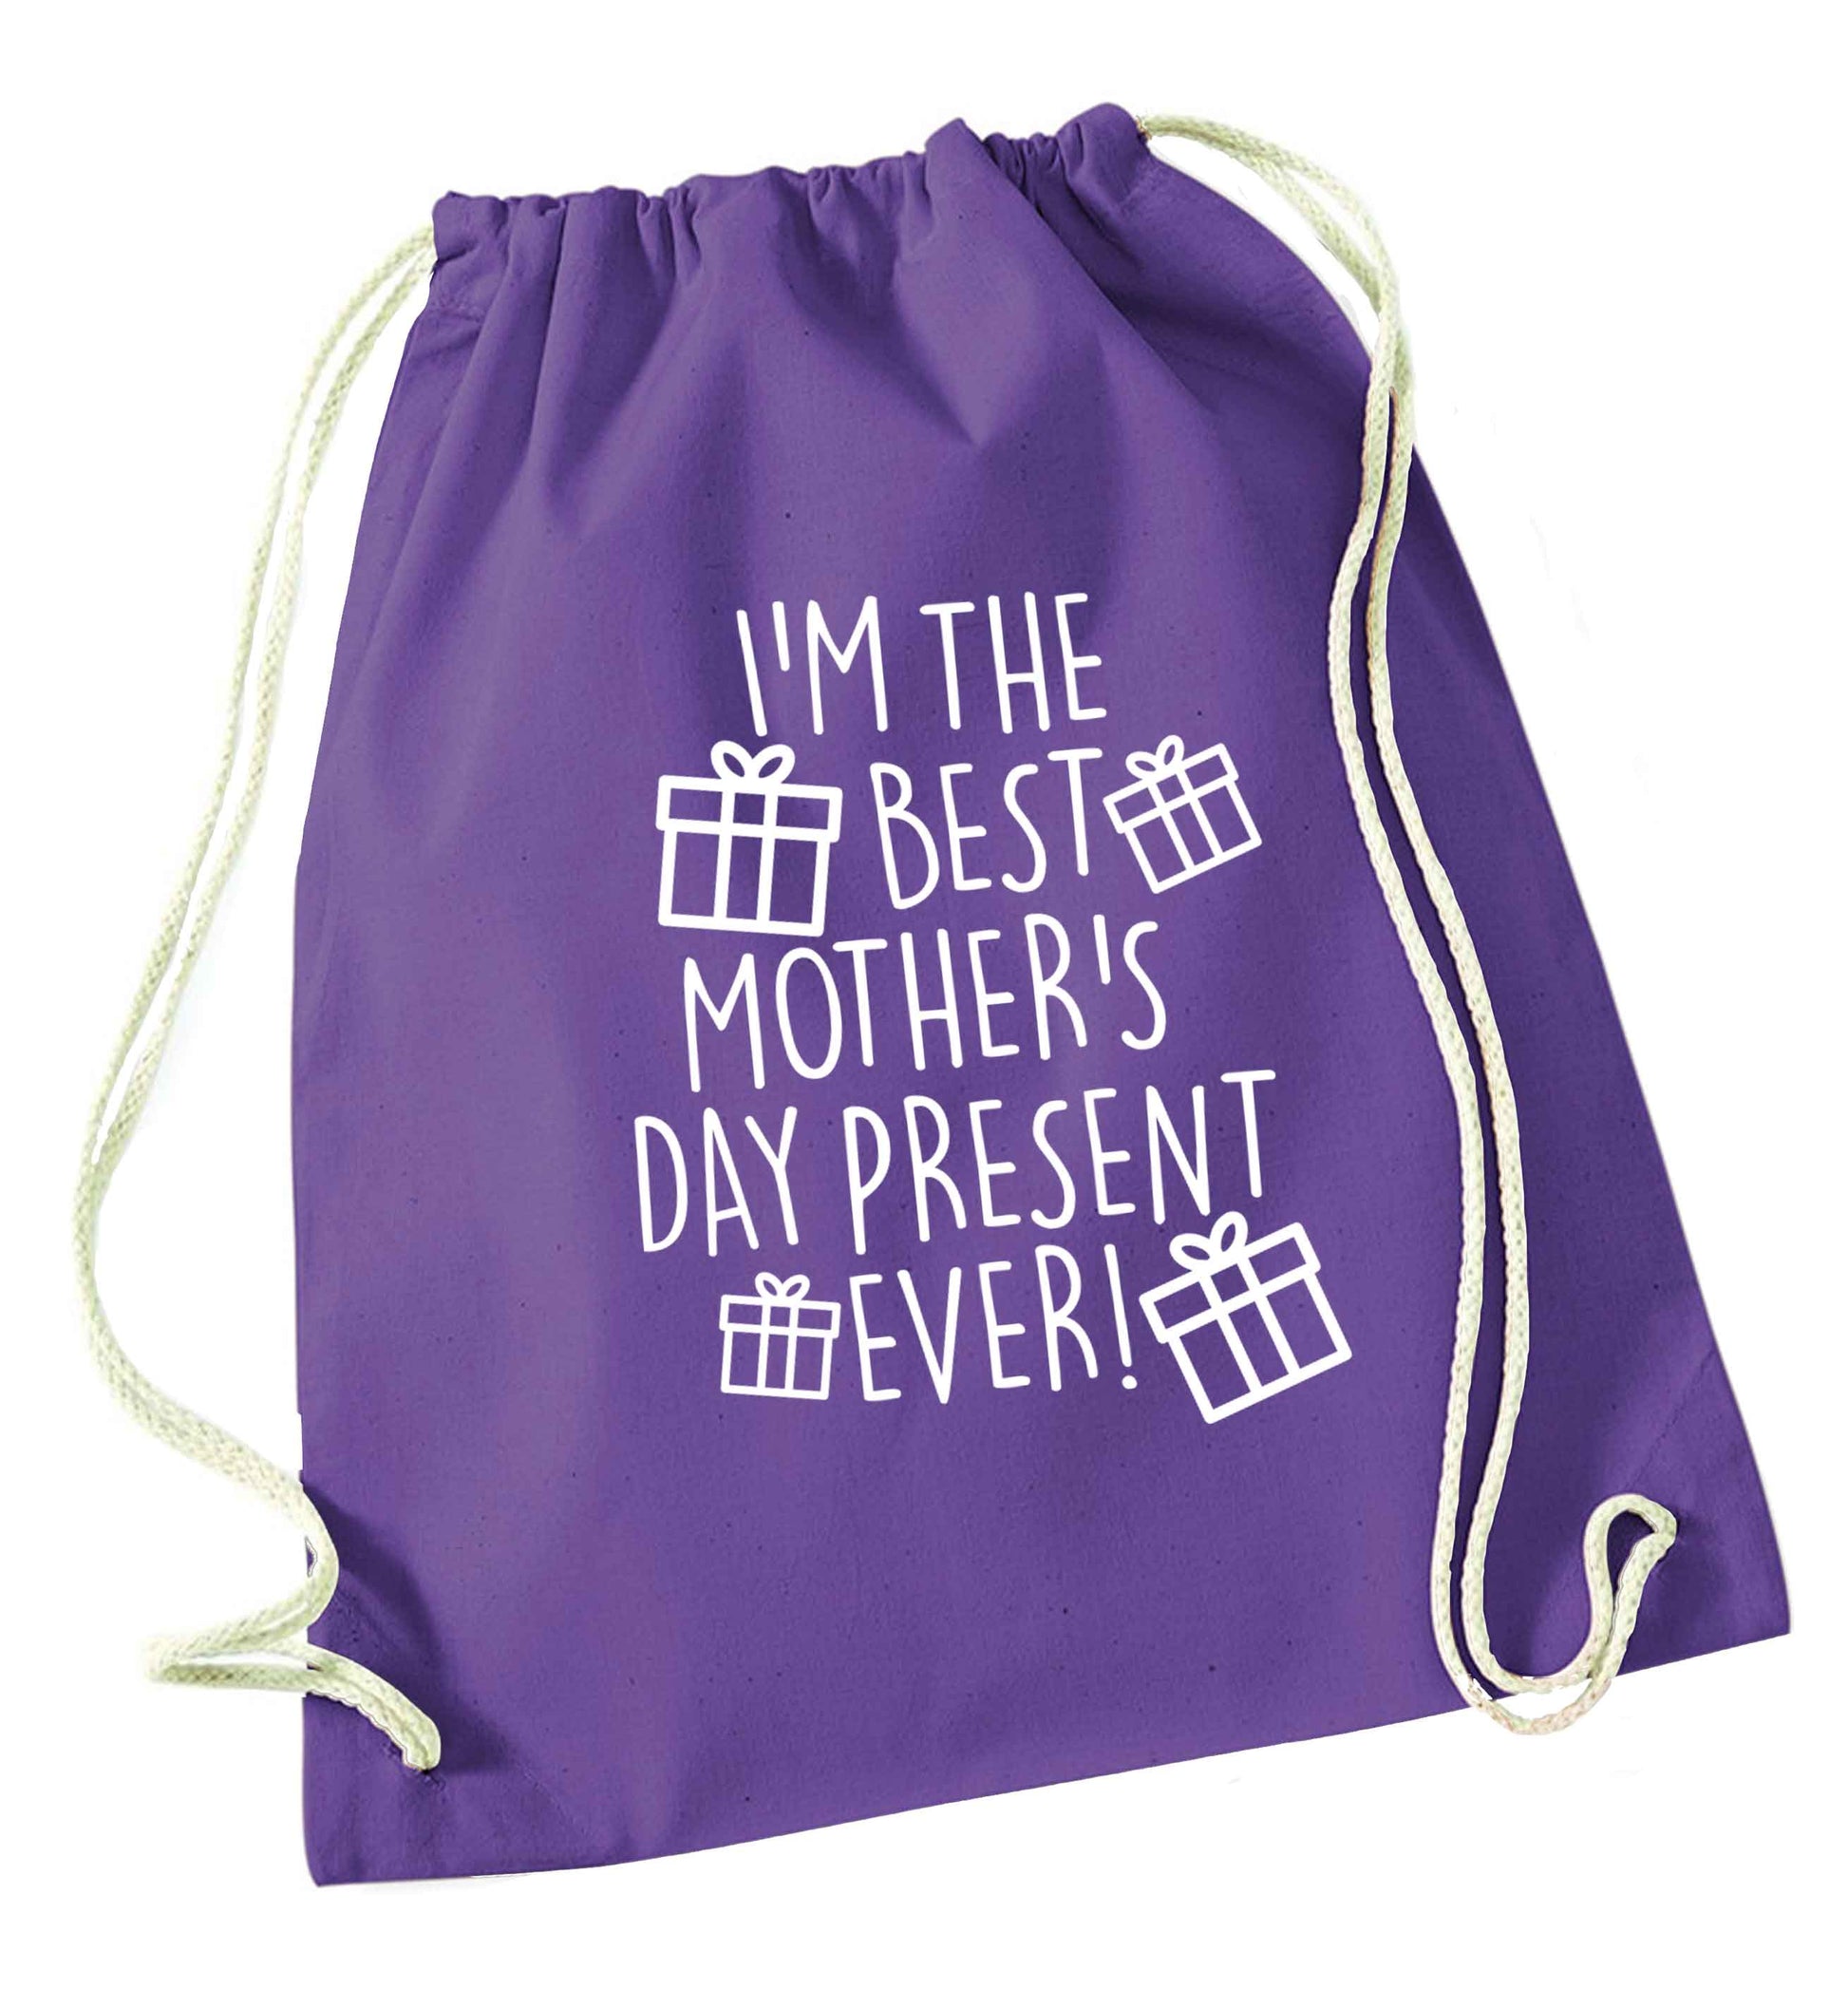 I'm the best mother's day present ever! purple drawstring bag